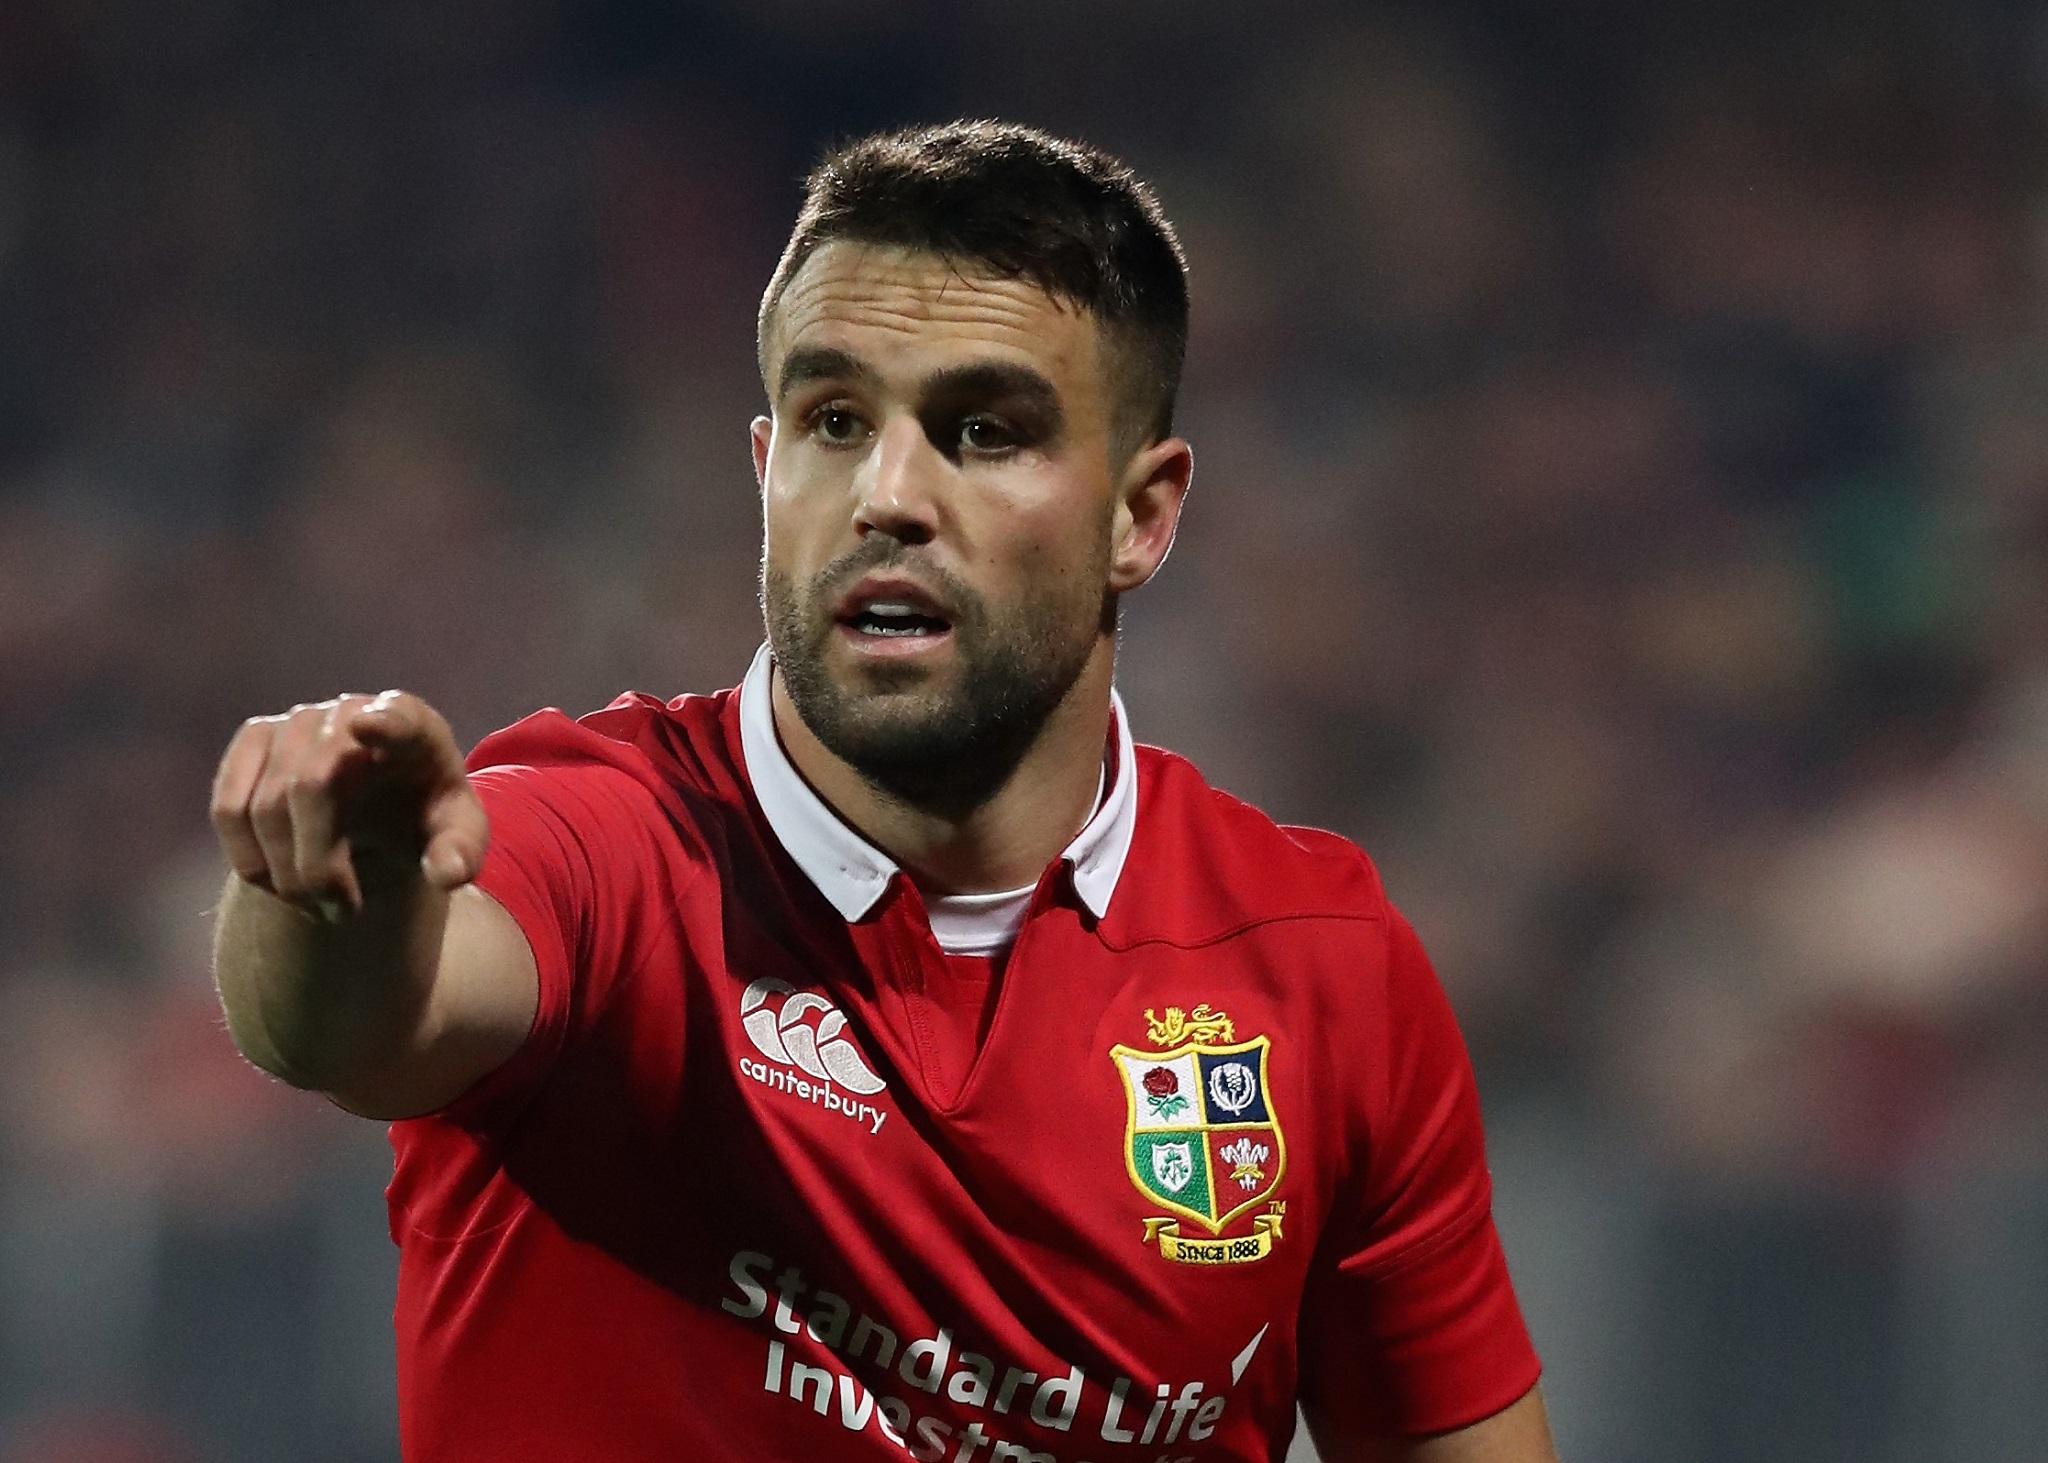 Conor Murray knows what the Lions must do to beat the All Blacks on Saturda